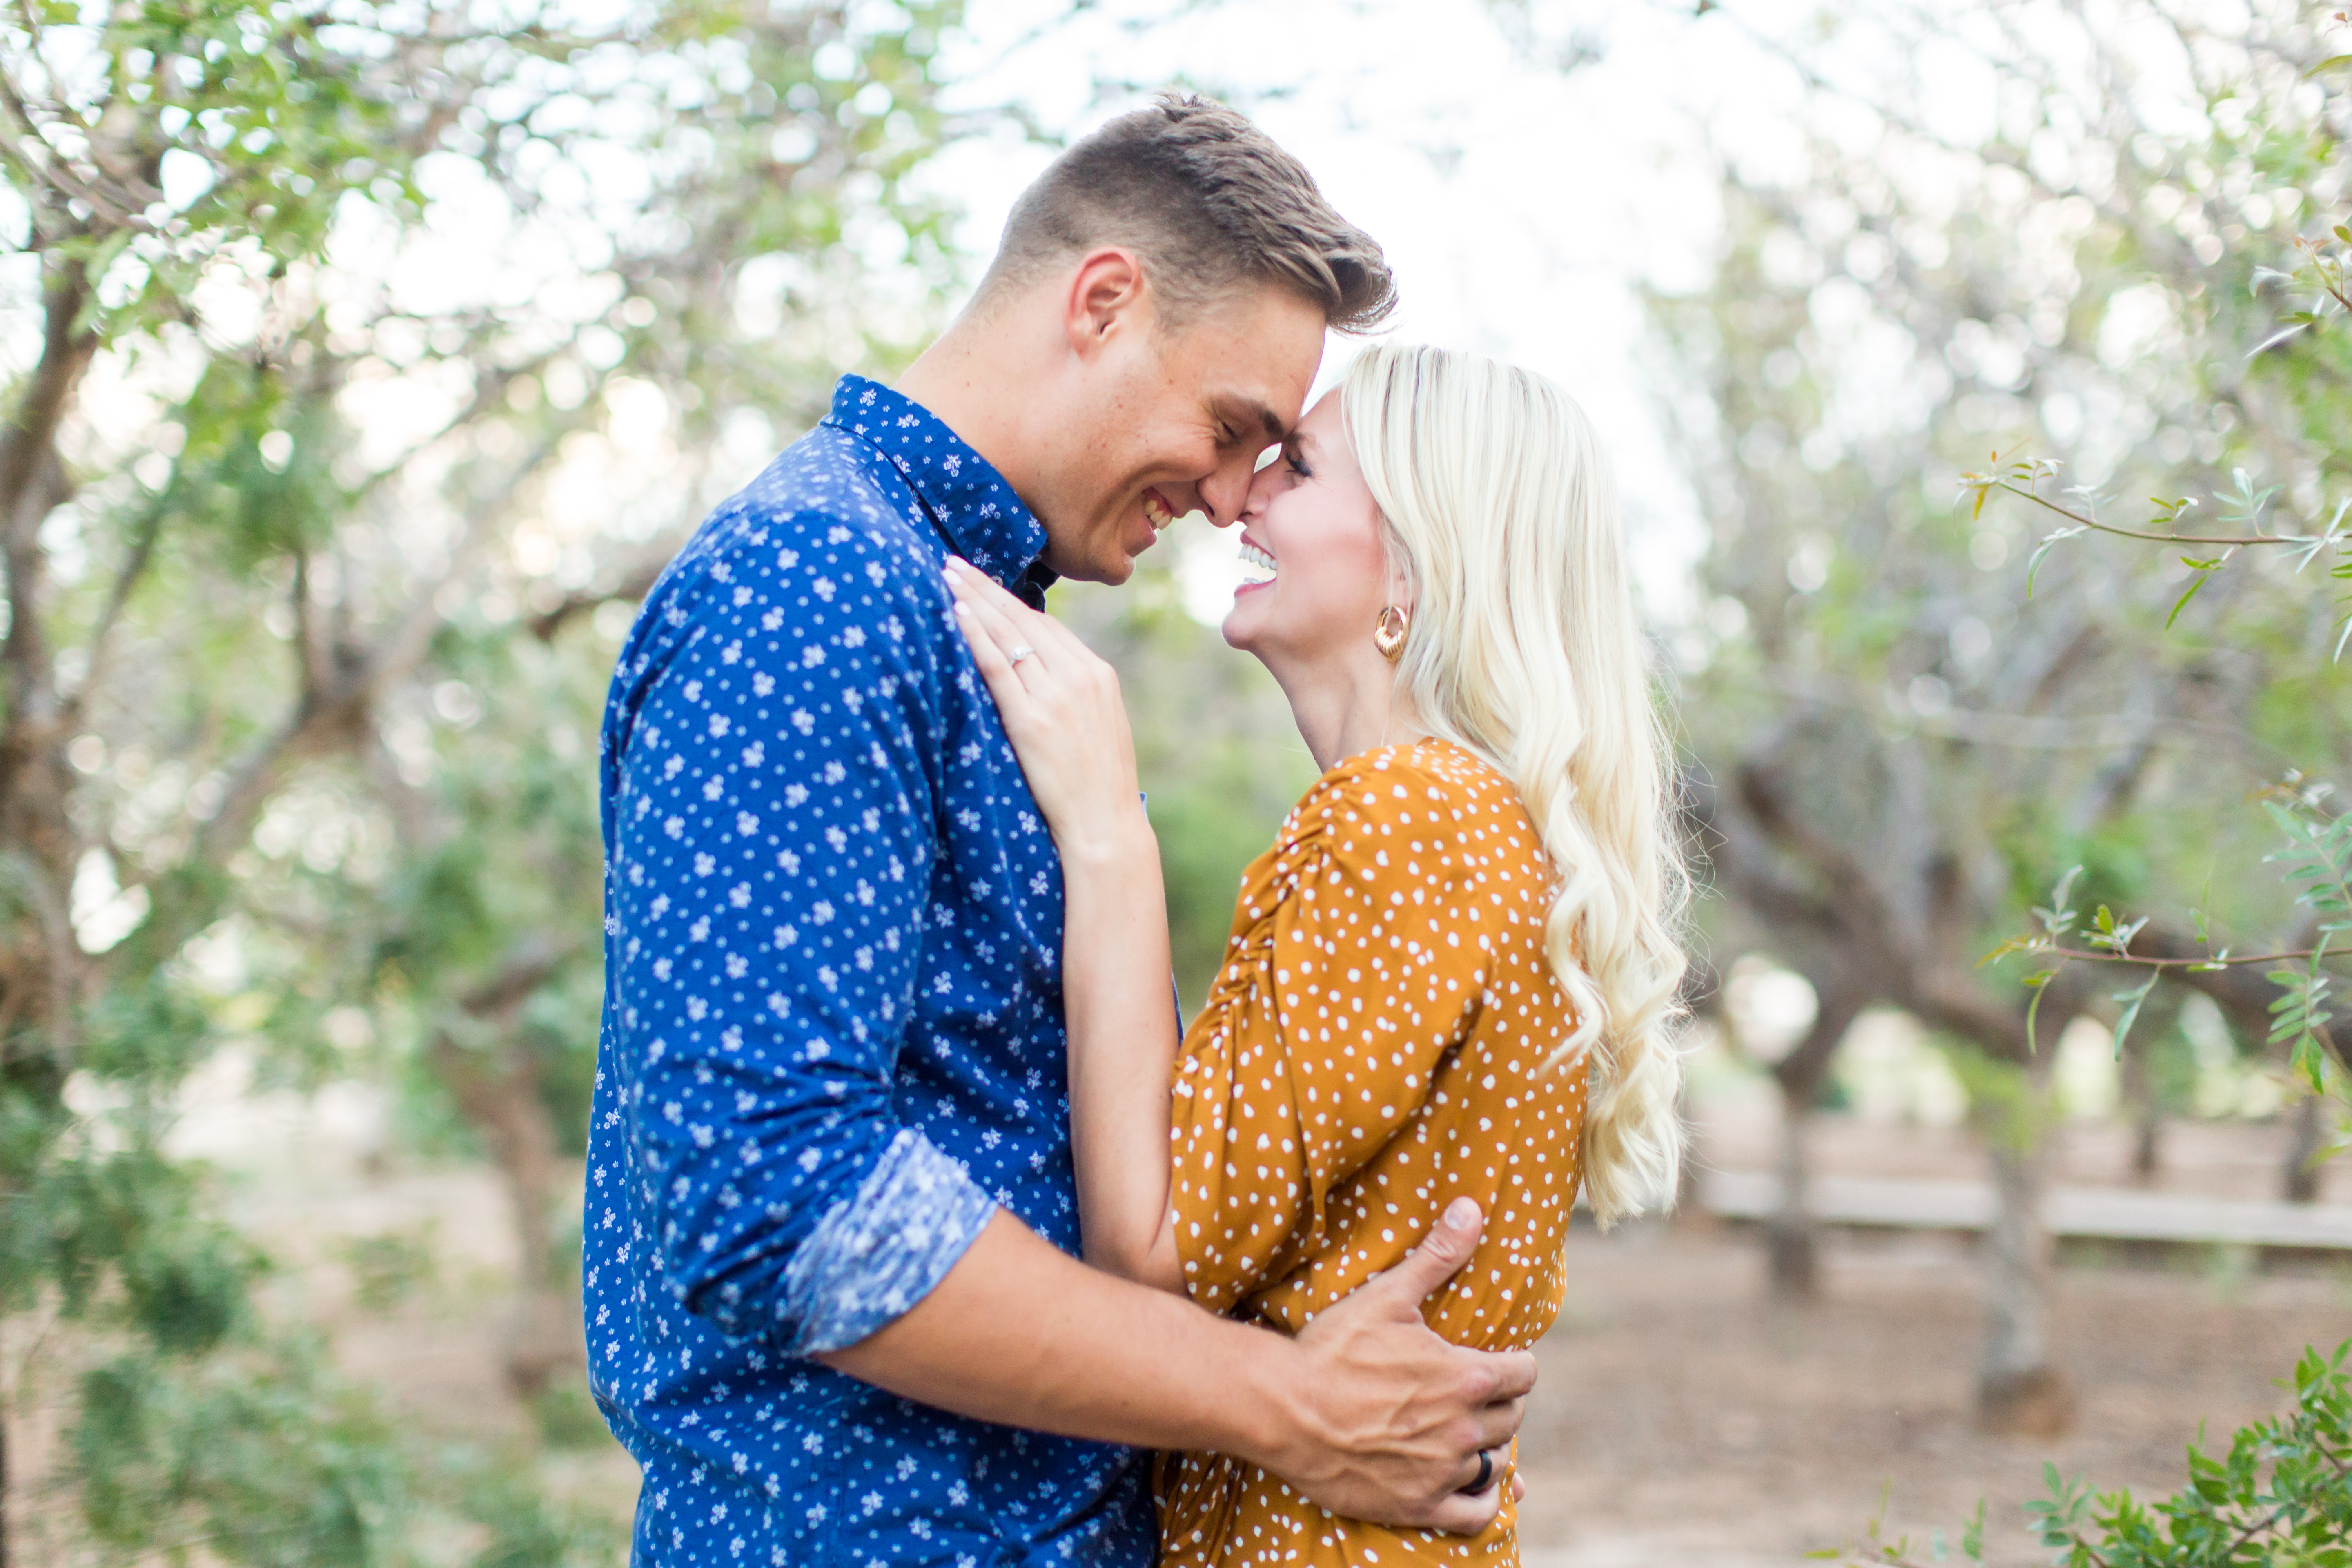 The Grove engagement session